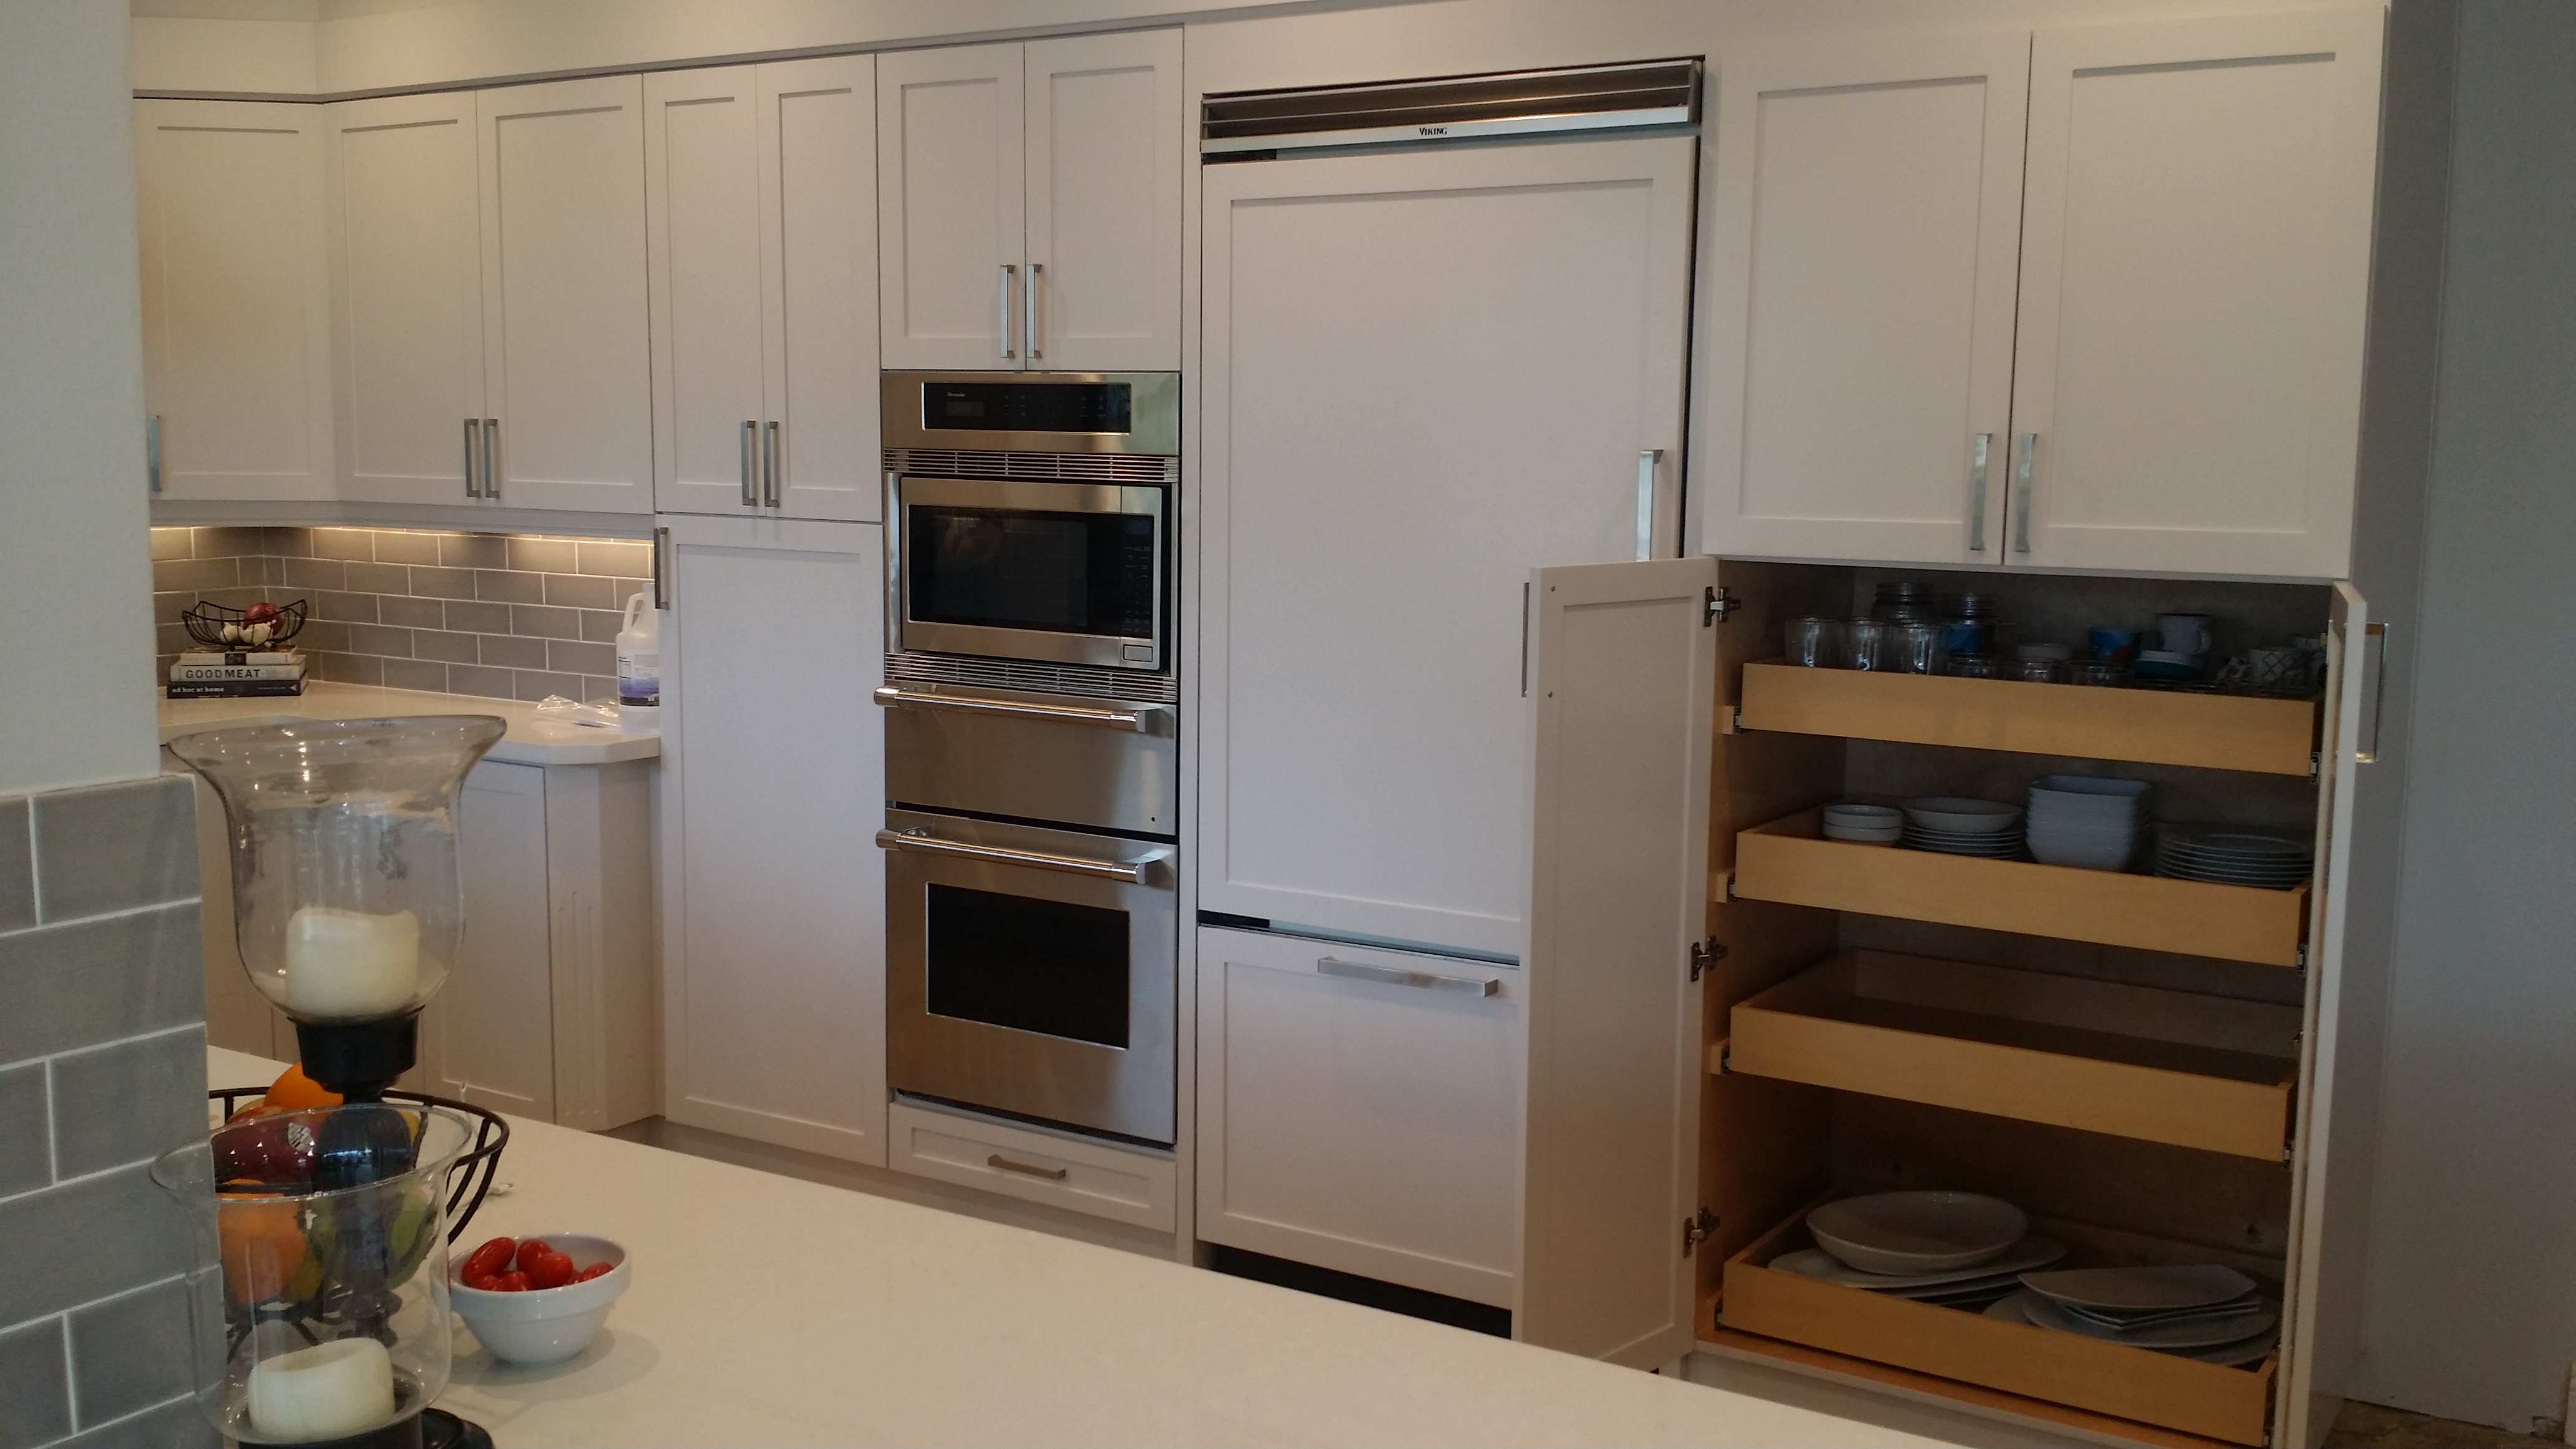 Finished Projects | New Style Kitchen Cabinets Corp.